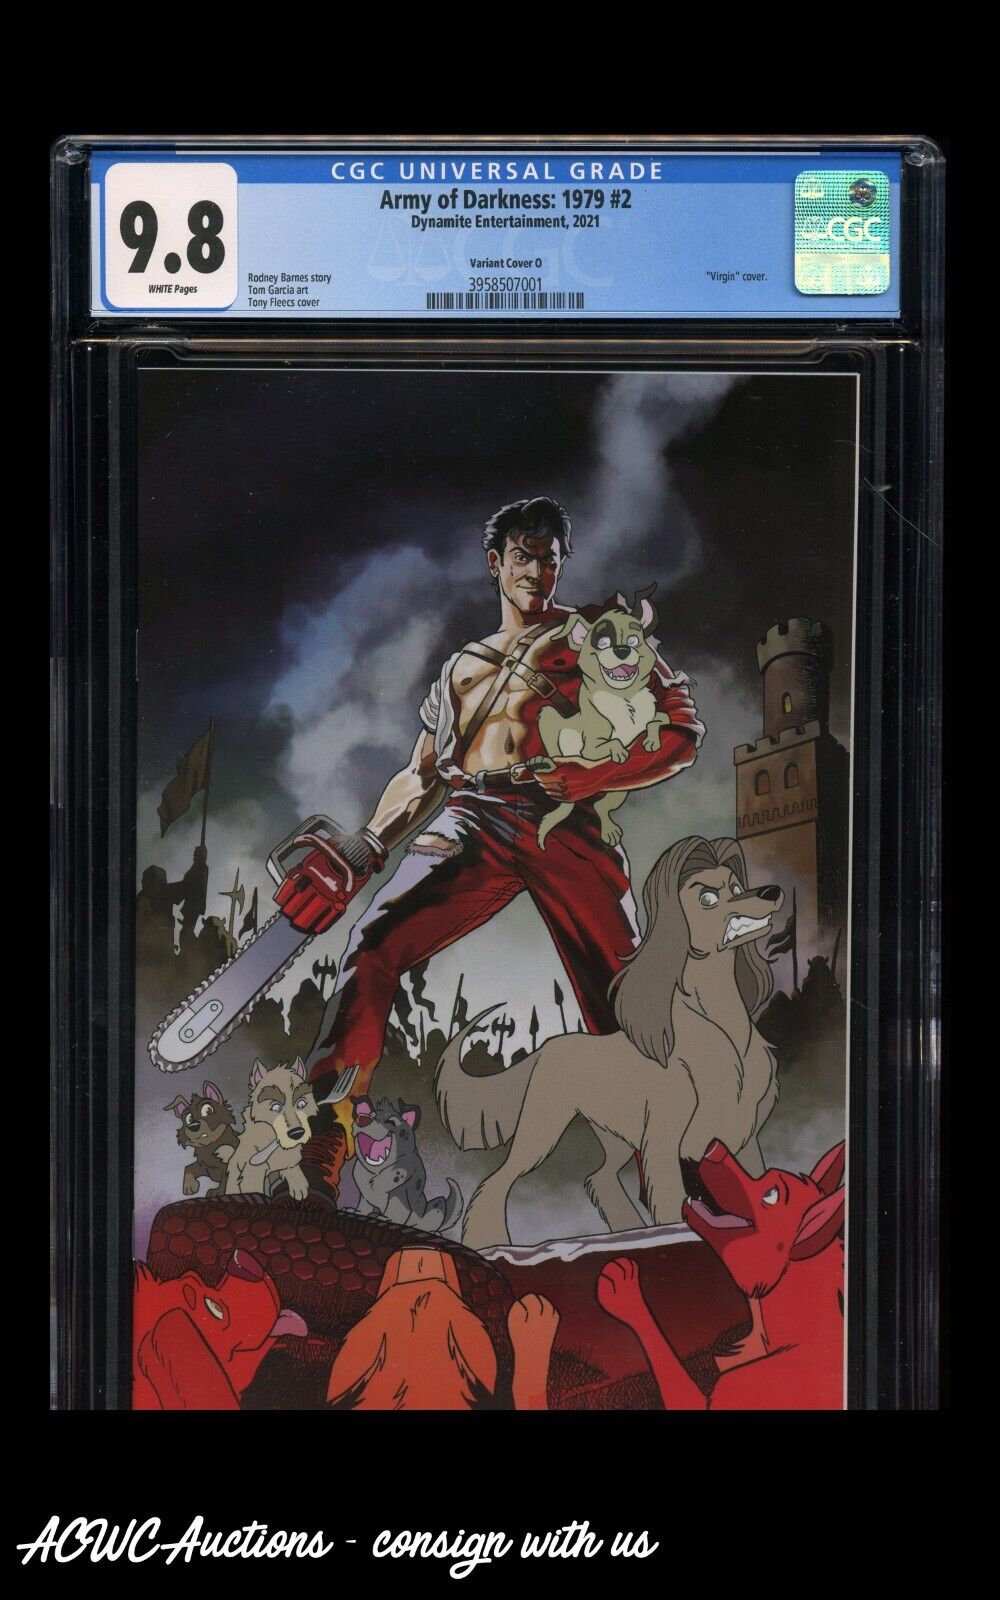 Army Of Darkness 1979 #2 Tony Fleecs Stray Dogs Virgin Cover - CGC 9.8 NM/MT